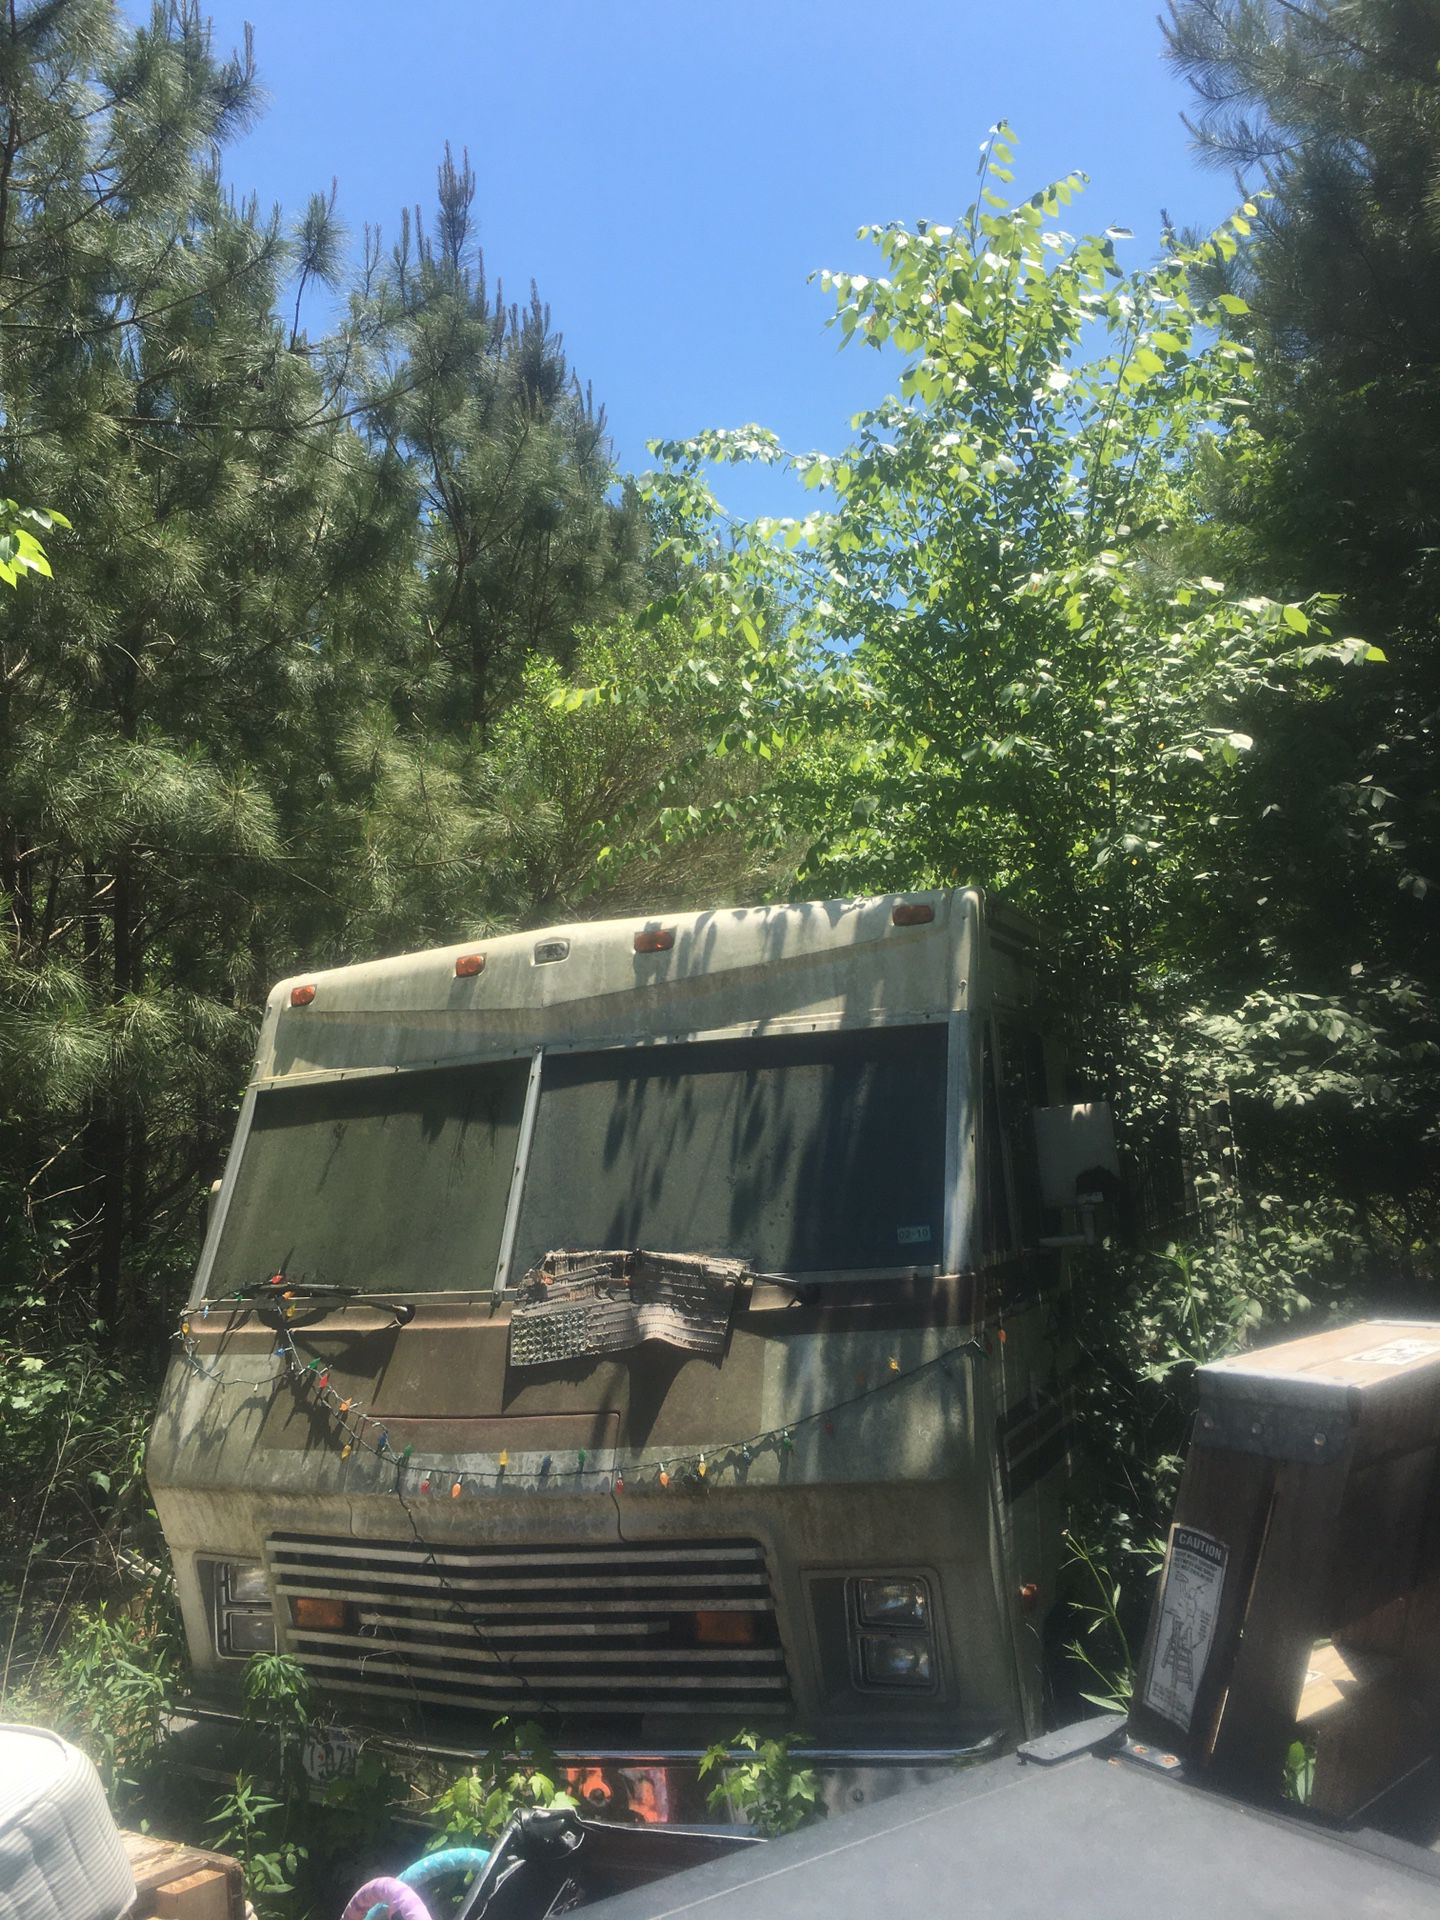 Photo Motor home needs cleaned can be used for deer lease